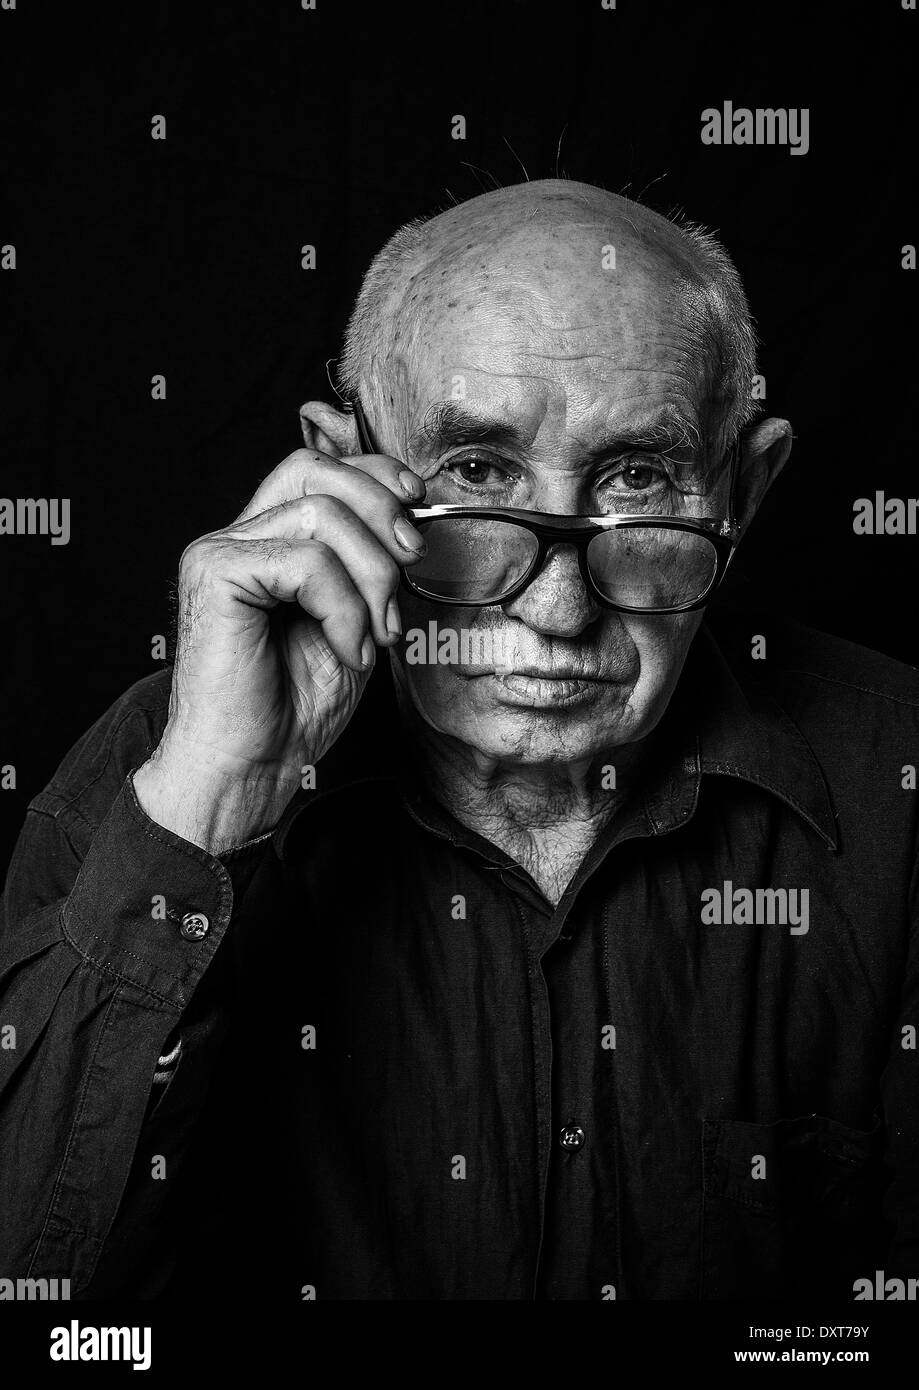 Black and White Portrait of an elderly man with a serious expression. Stock Photo